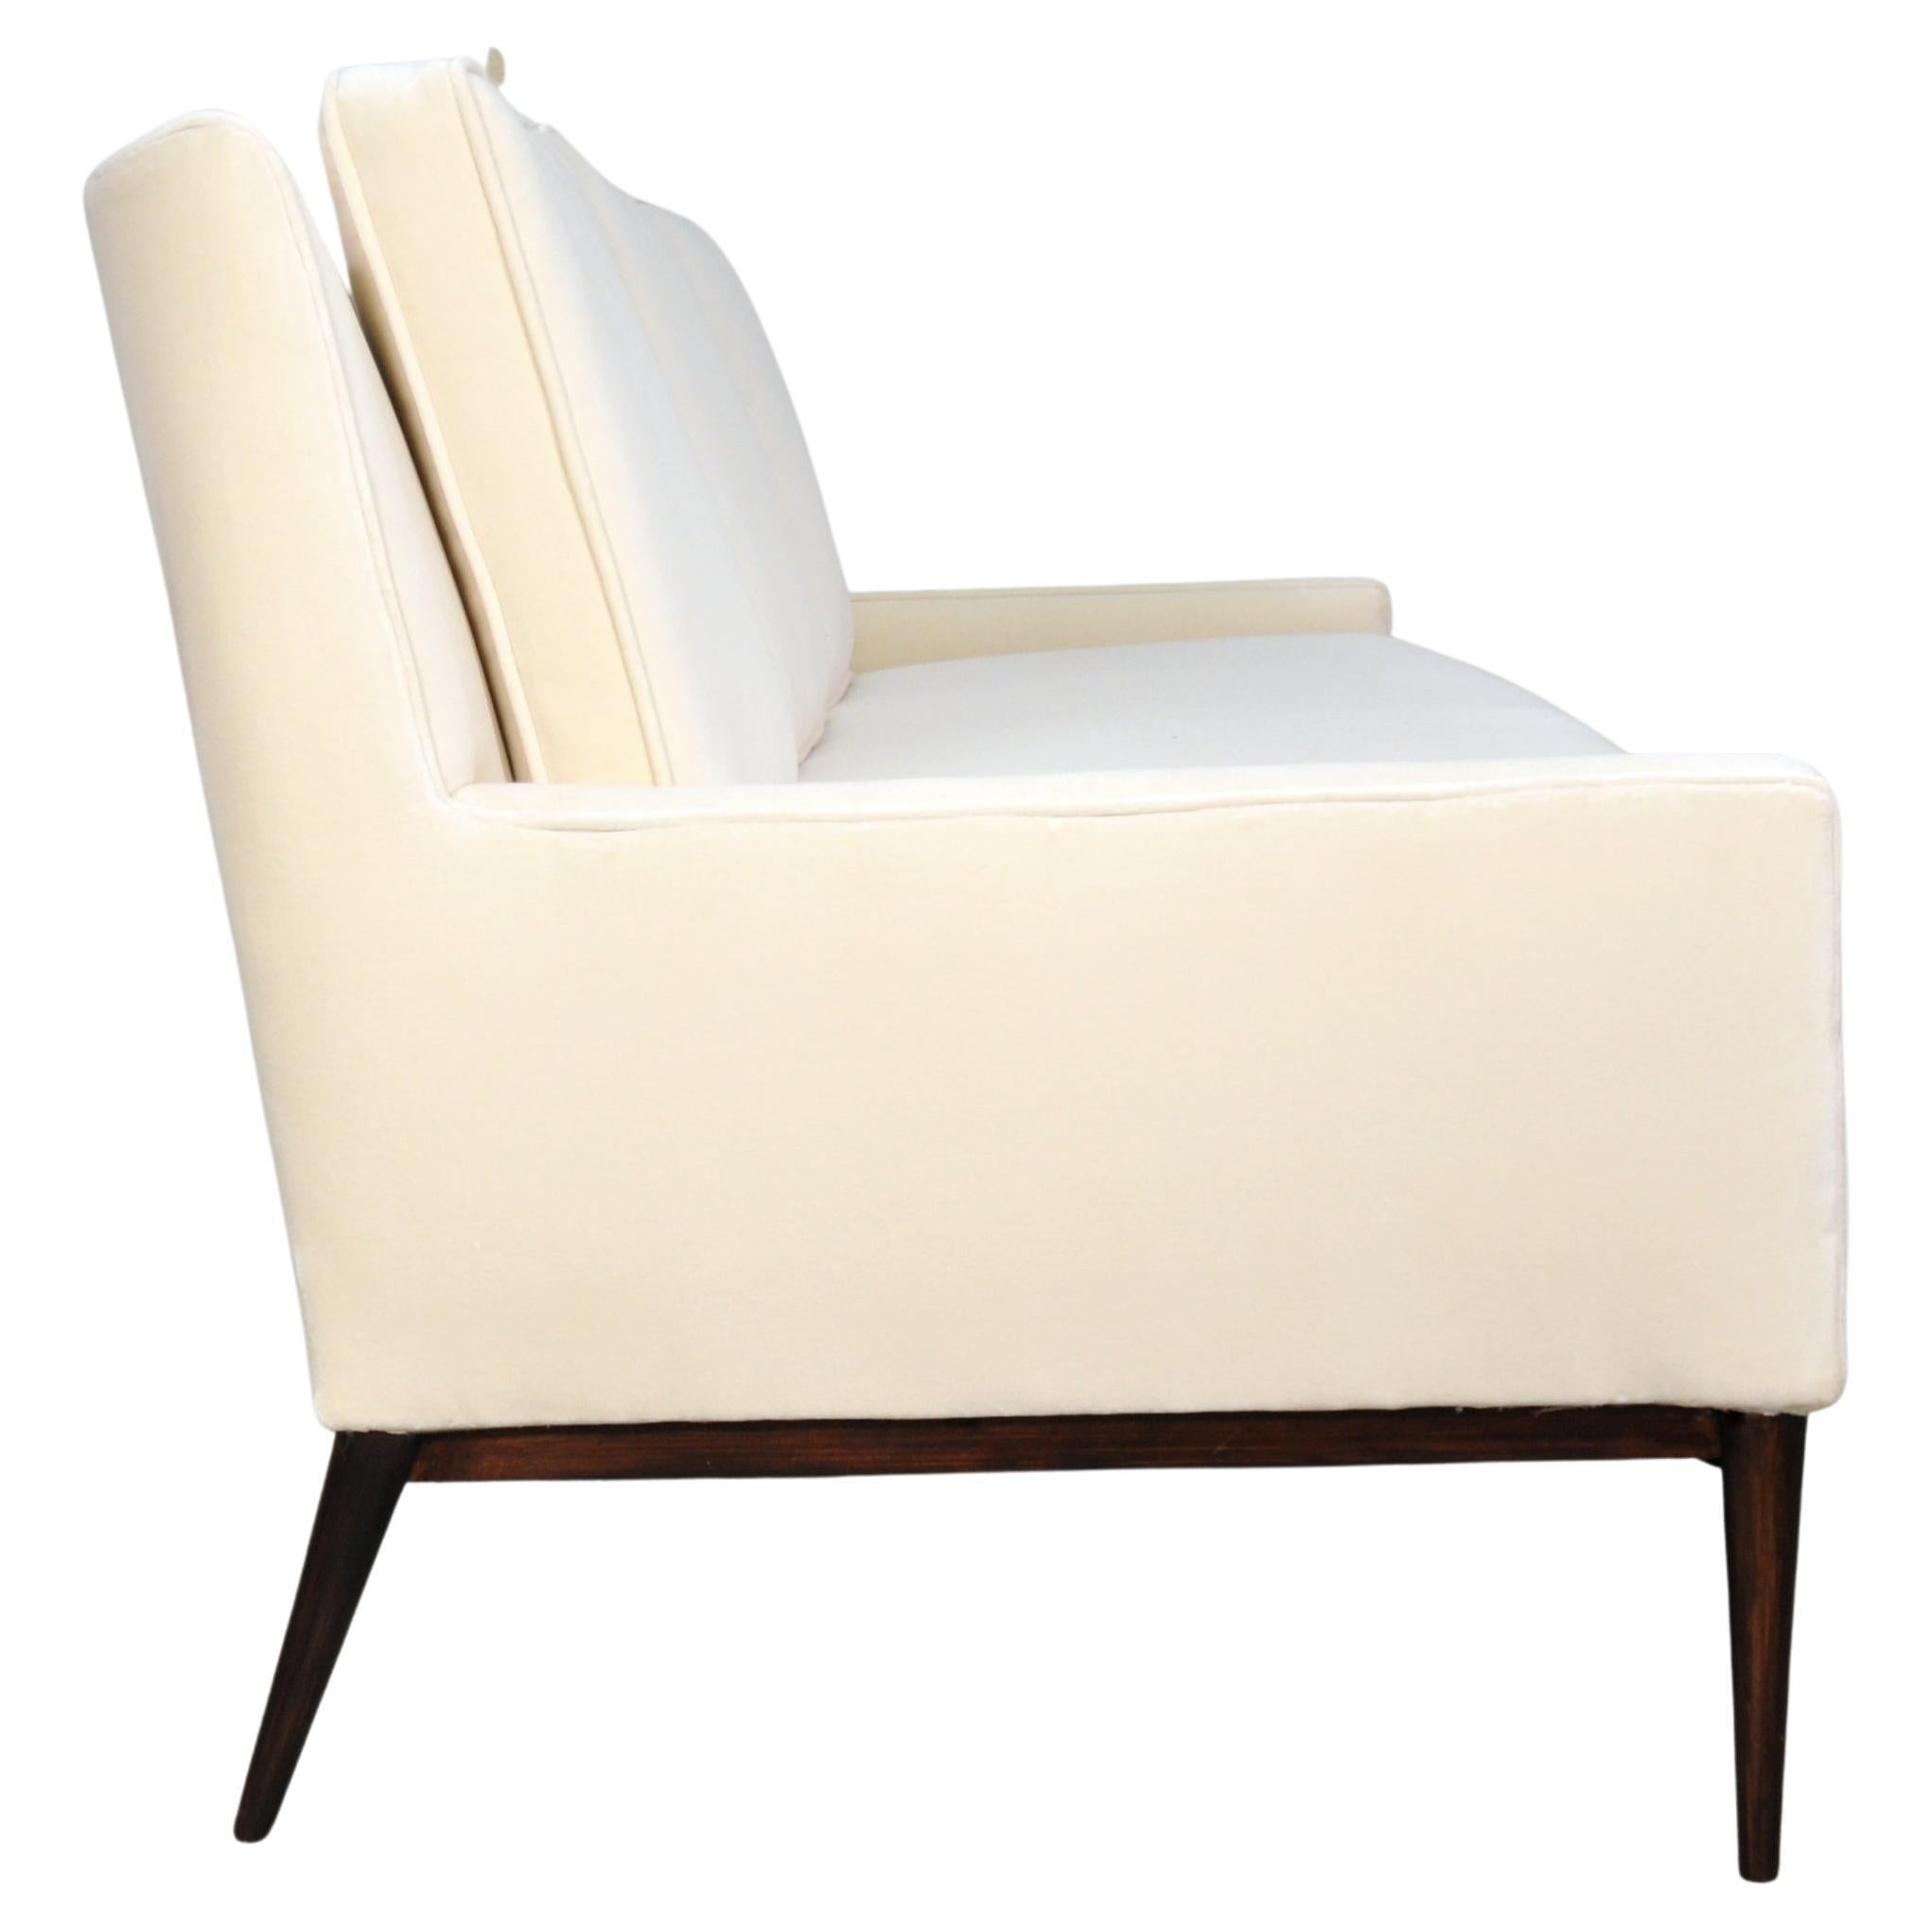 Reupholstered Mid-Century Modern model 1307 light cream velvet sofa by Paul McCobb for Directional. The couch has been recovered in a gorgeous neutral velvet. The sofa features a slight wing back and beautifully sculpted solid mahogany wood base